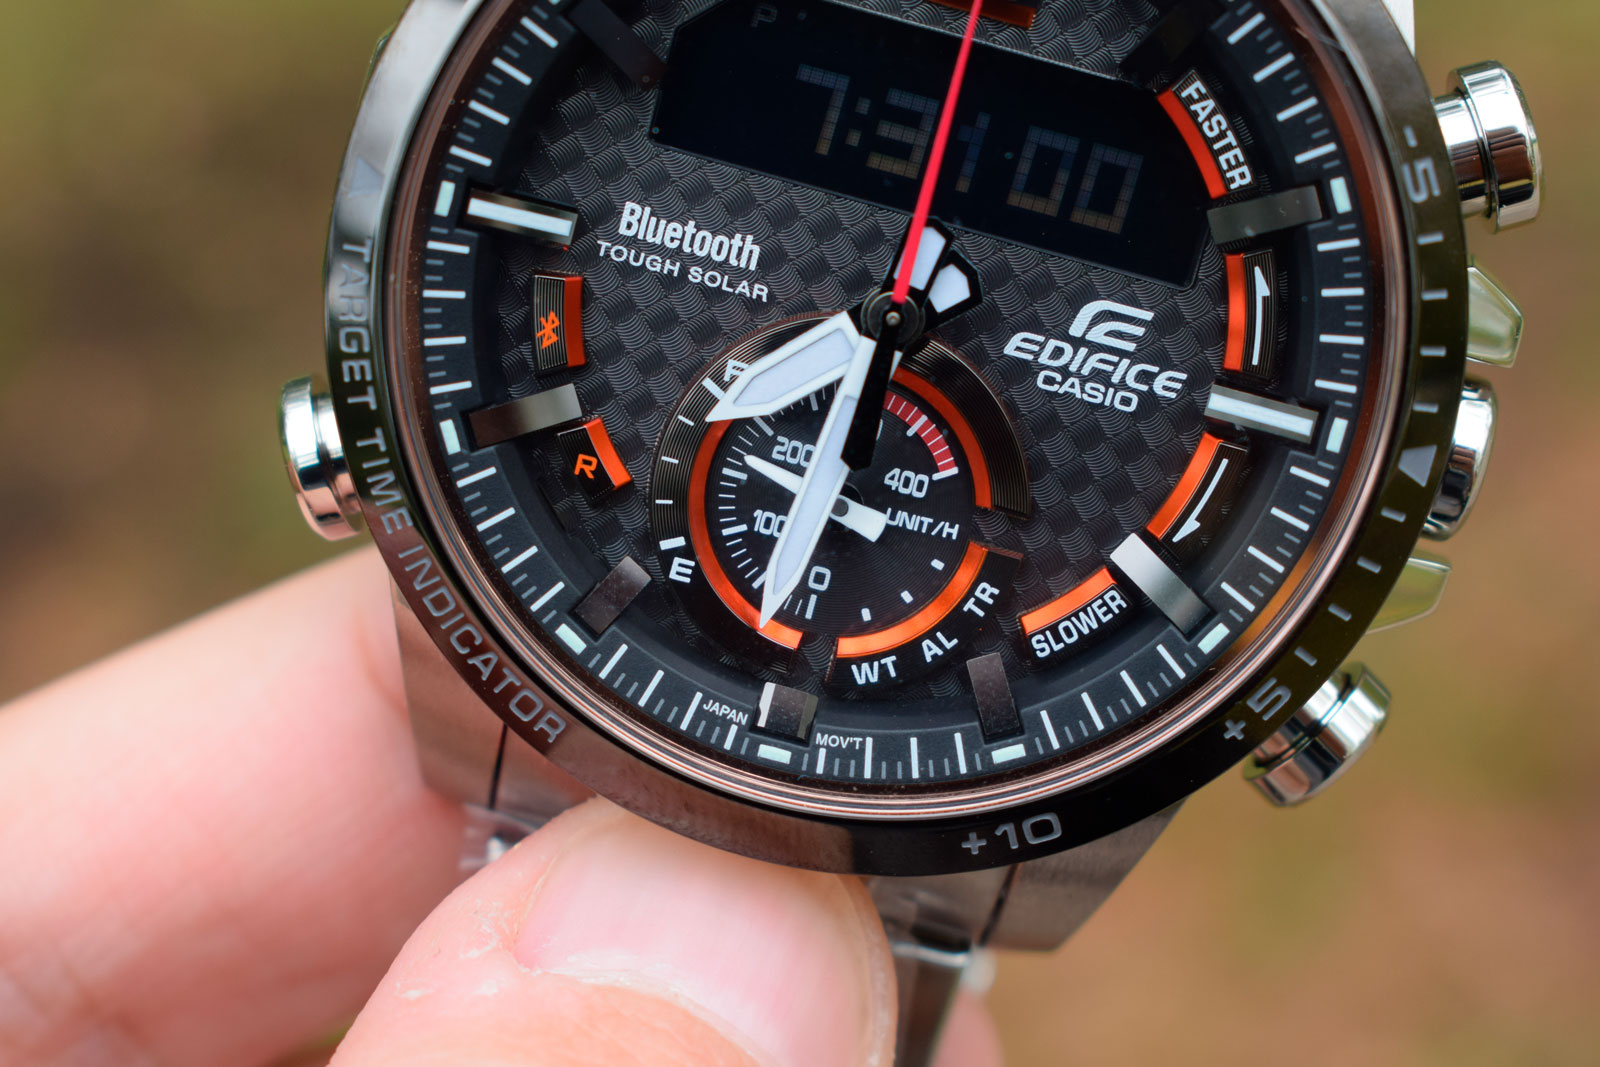 Casio Edifice ECB-800 target lap times for professional racers